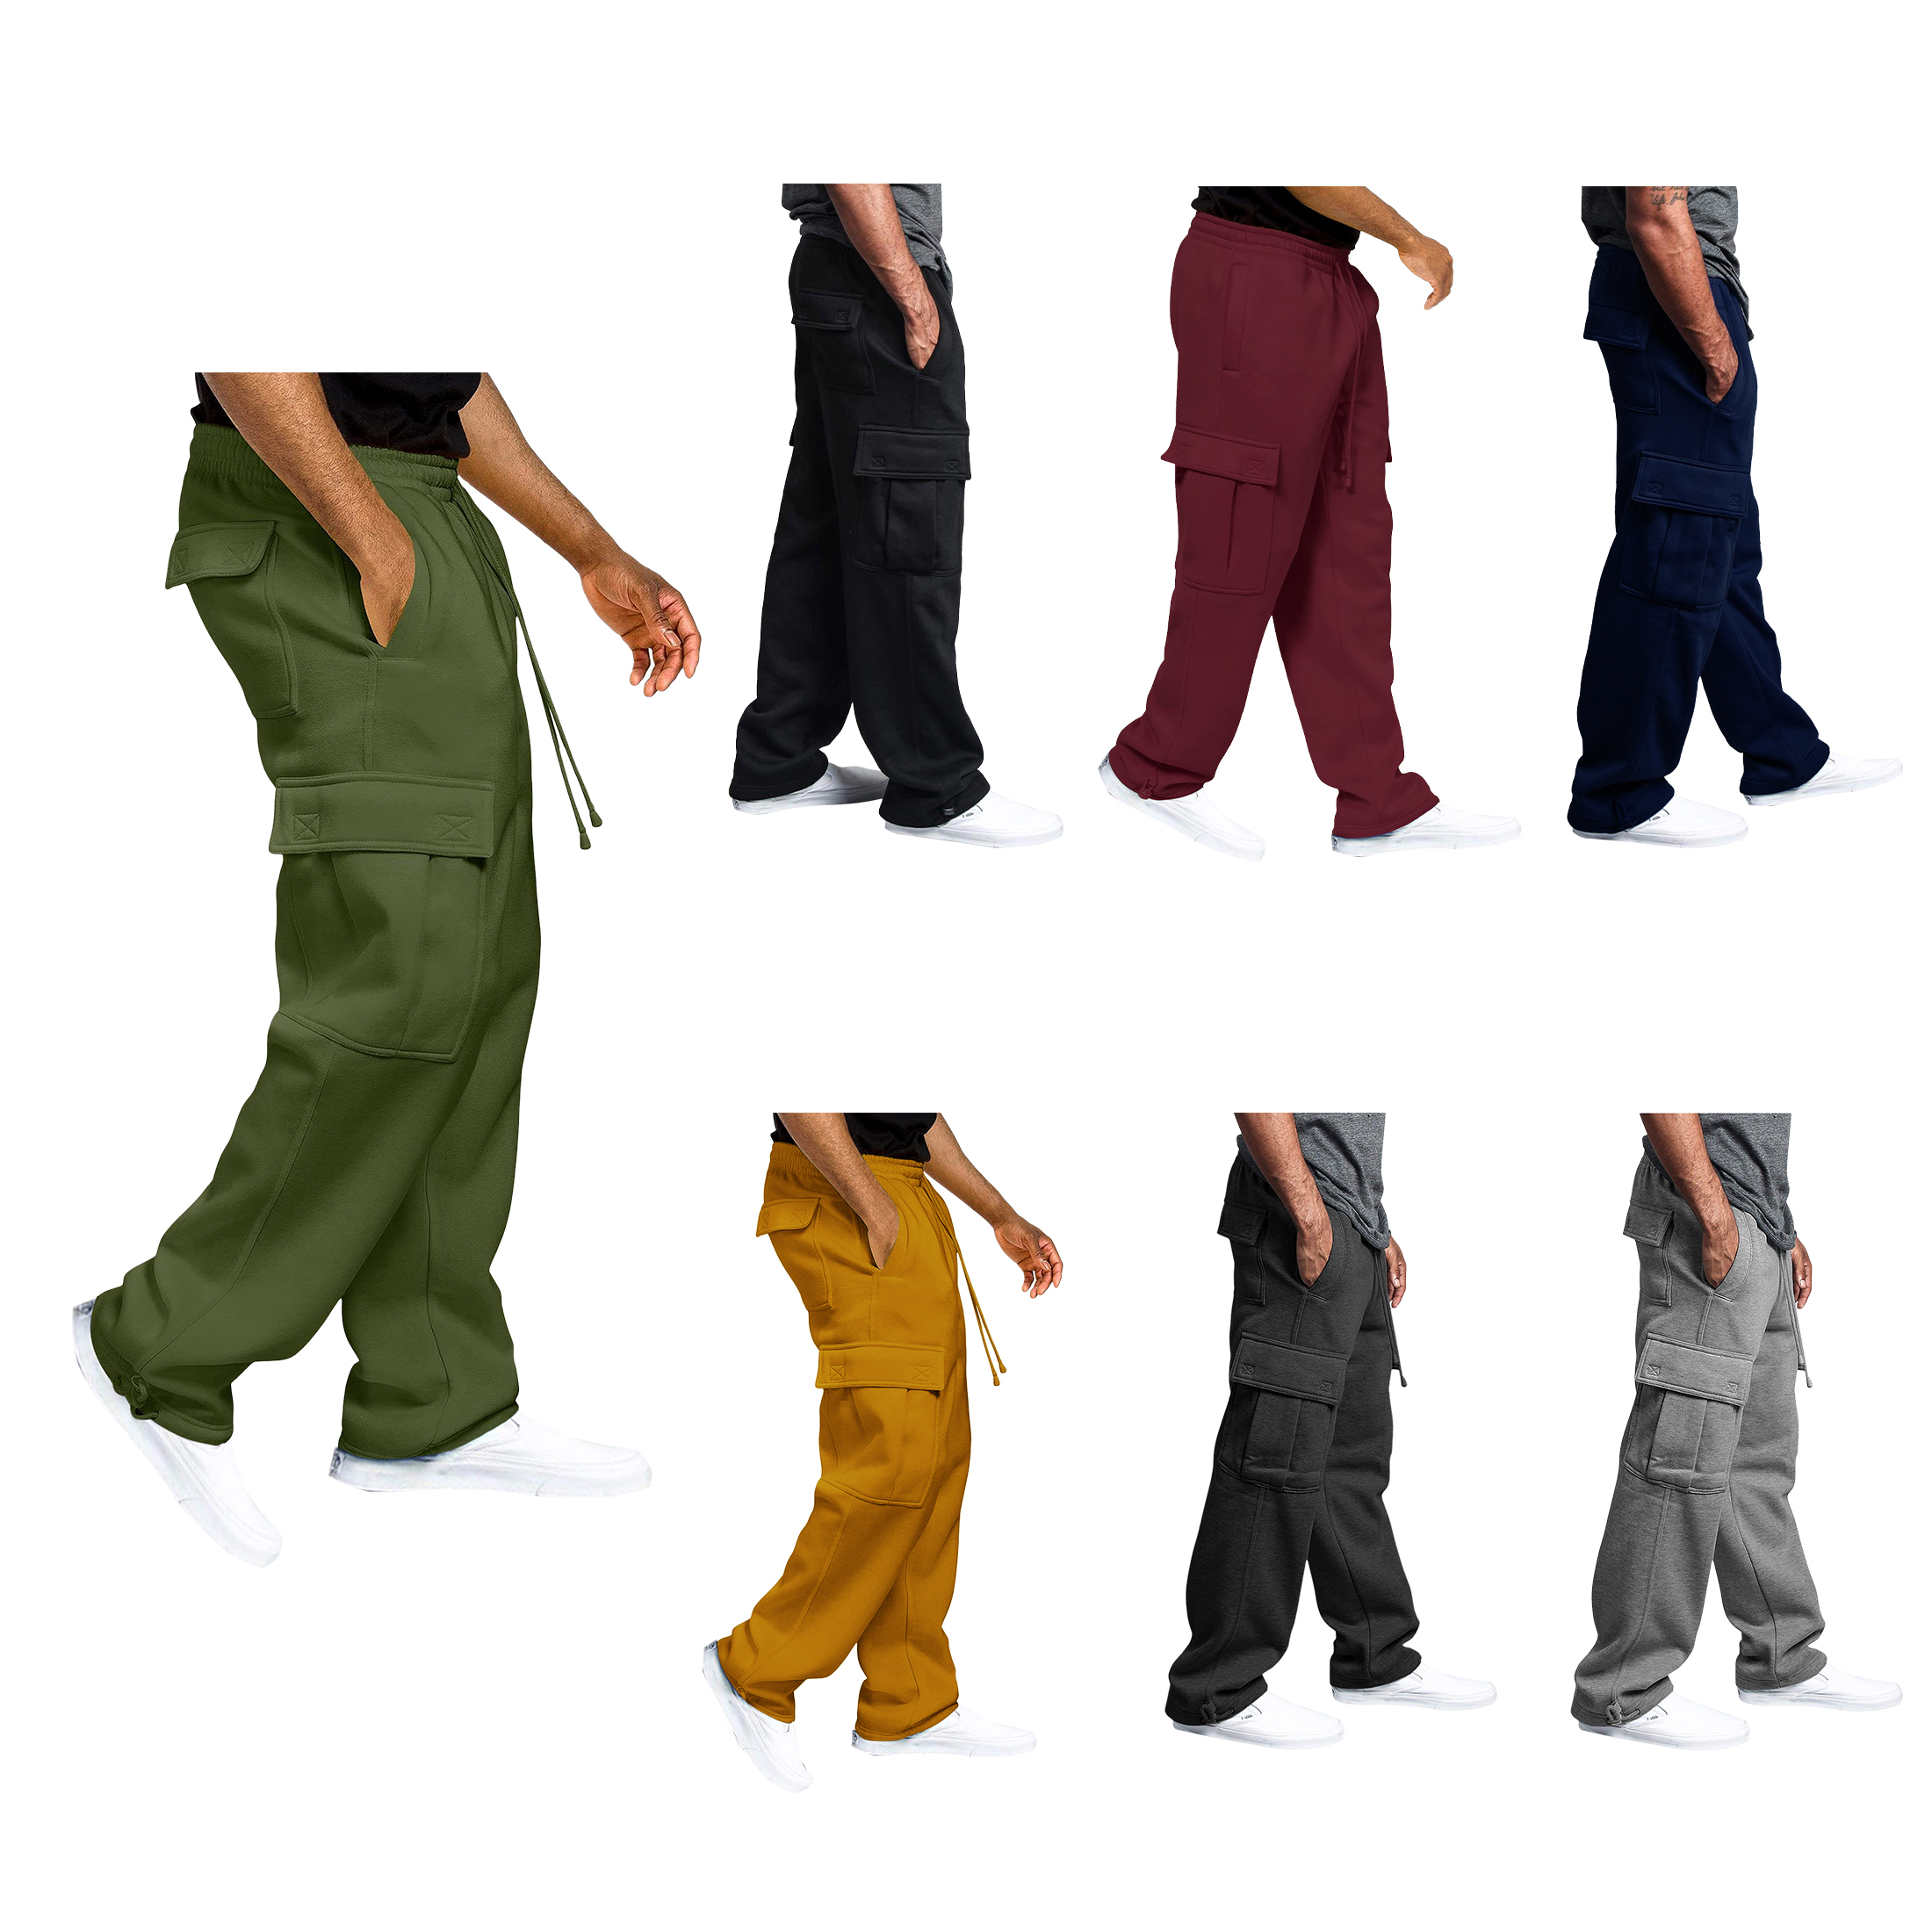 2-Pack: Men's Casual Solid Cargo Jogger Sweatpants With Pockets - XL